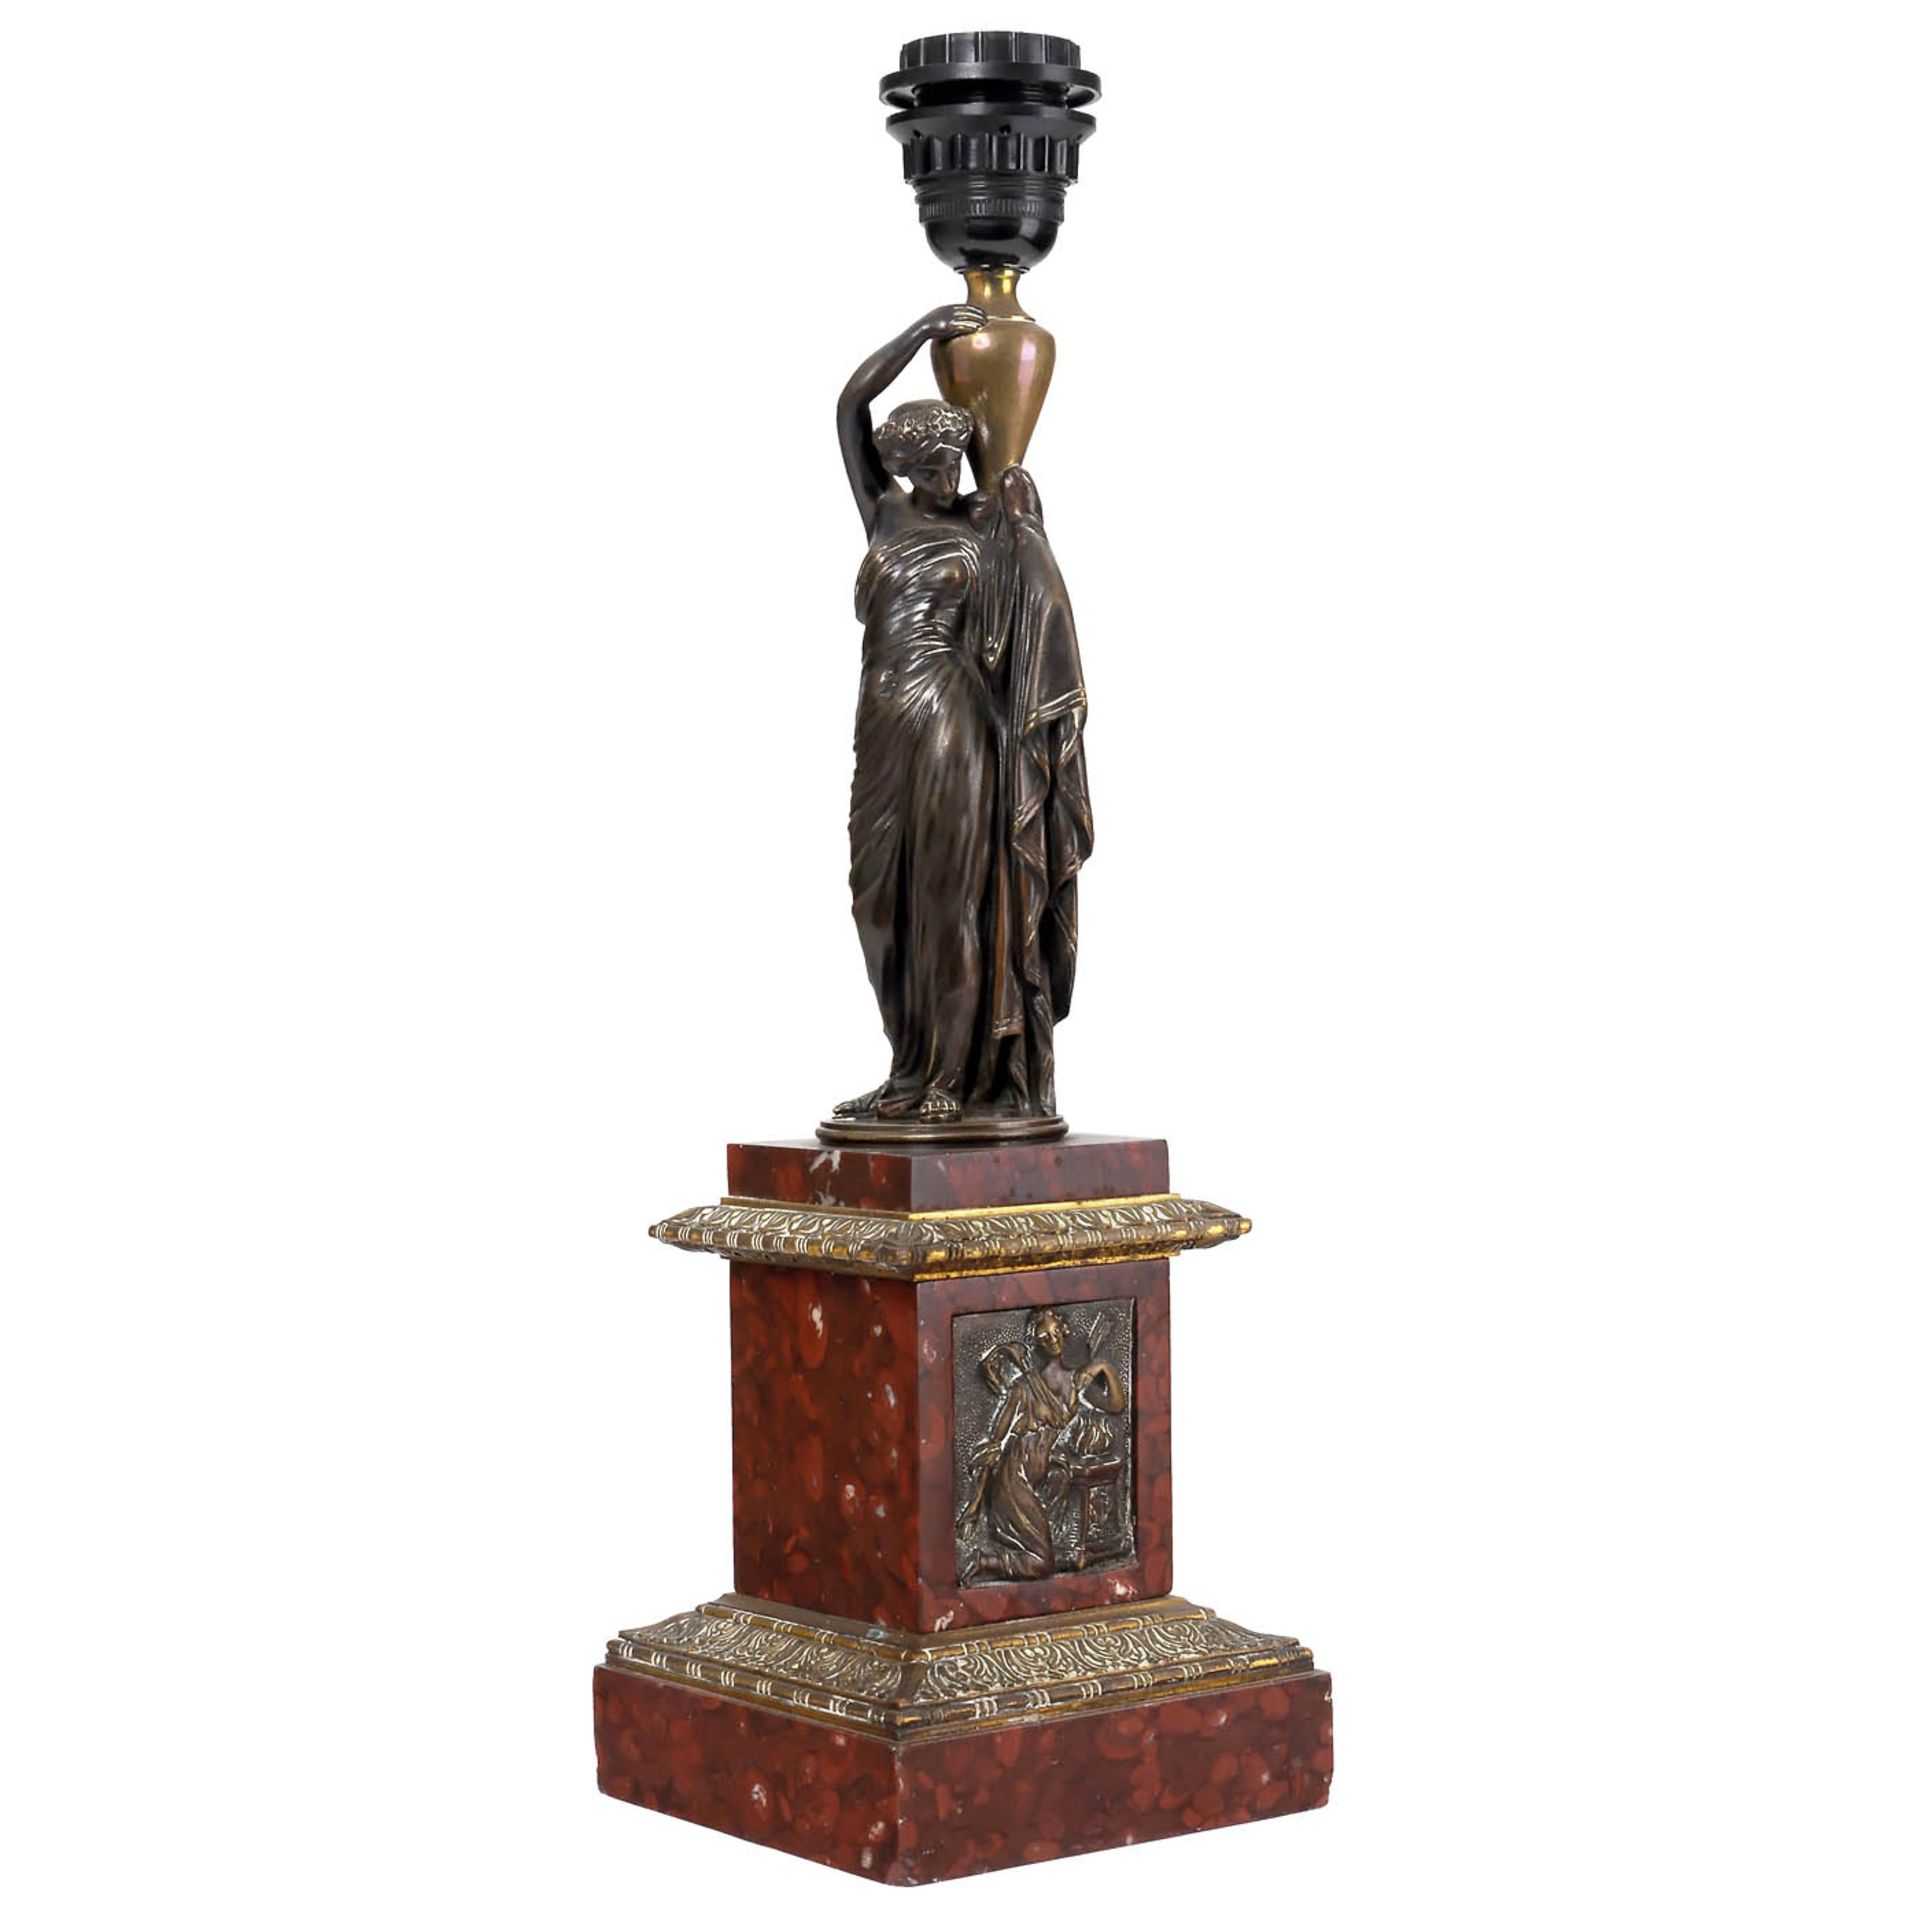 French Bronze Figure by Pradier, c. 1850-70 - Image 2 of 4